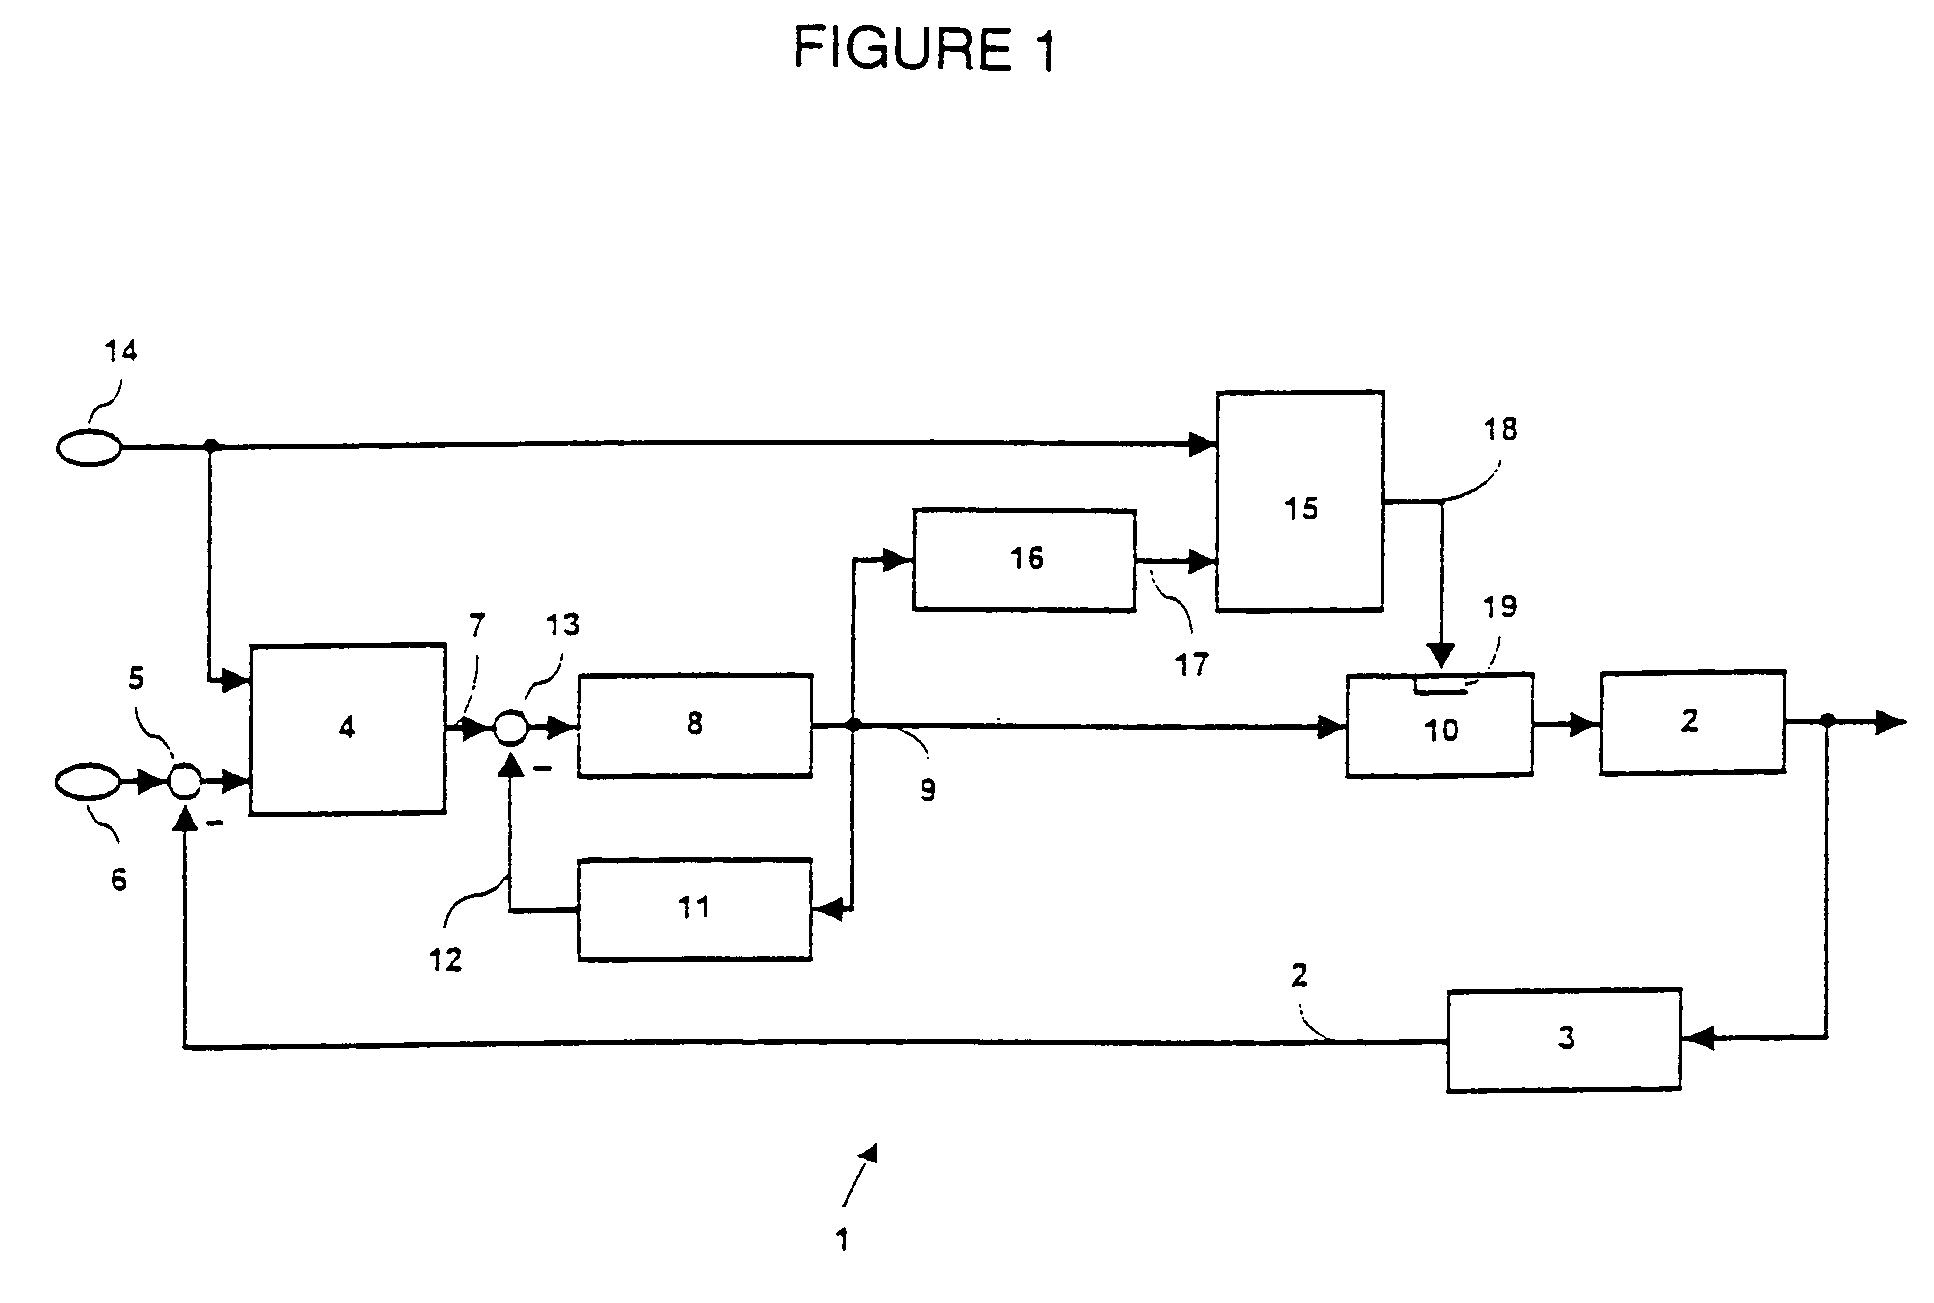 Apparatus for controlling the delivery of medical fluids